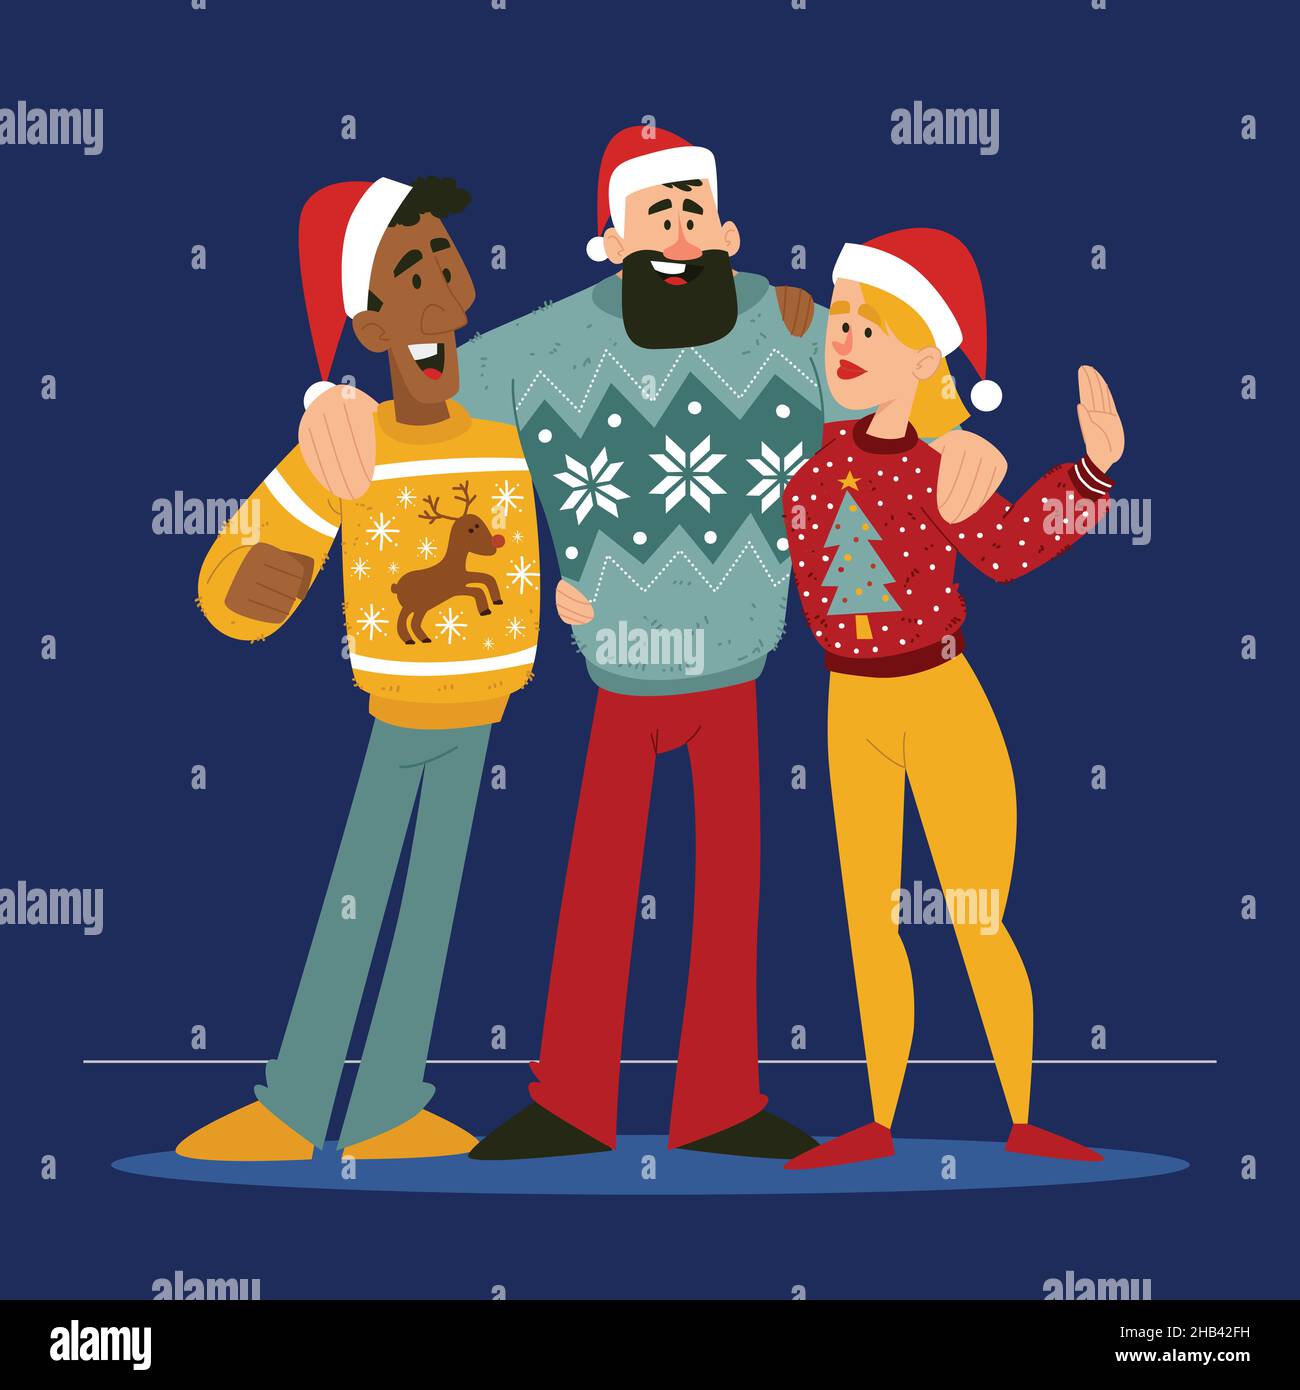 people wearing ugly sweaters vector design illustration Stock Vector